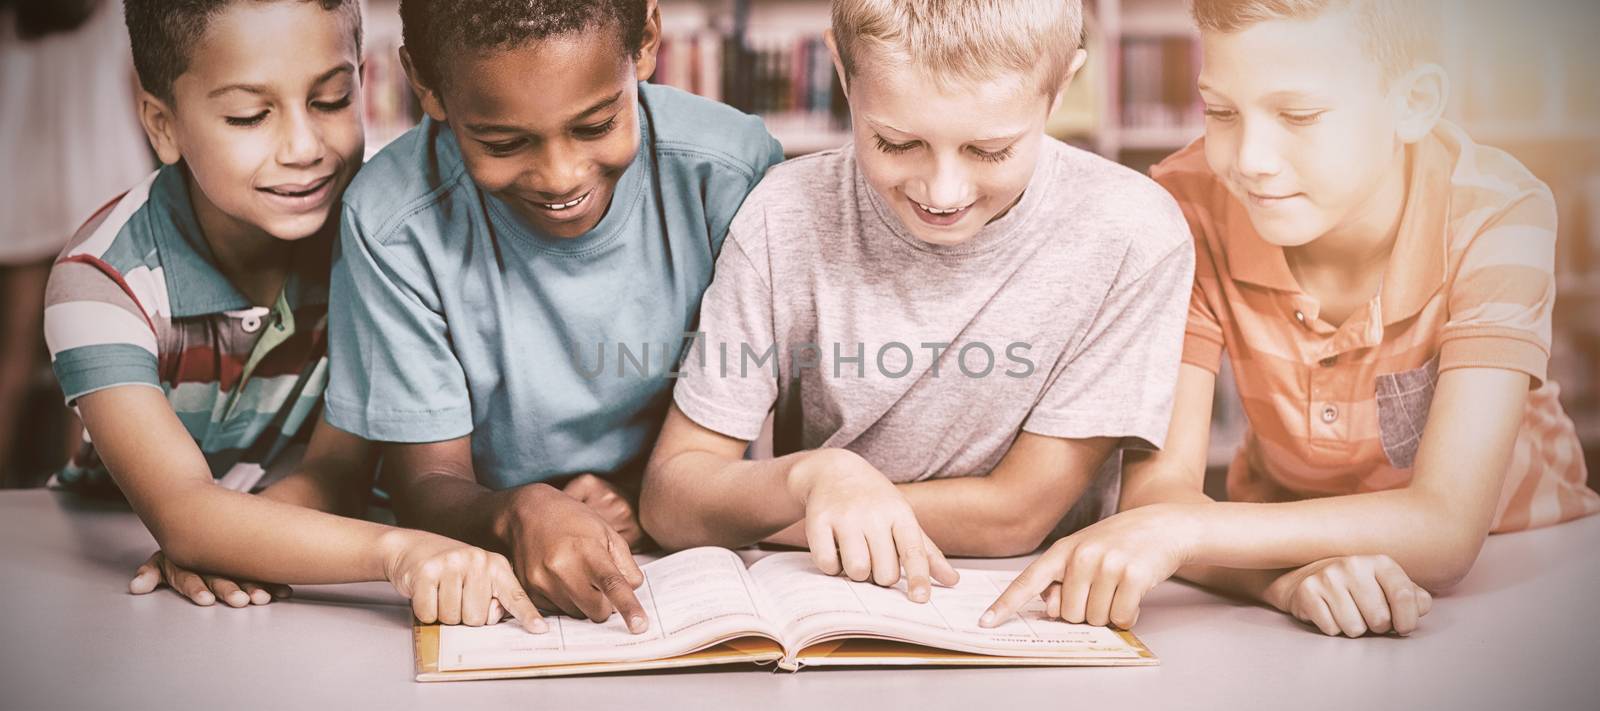 School kids reading book together in library by Wavebreakmedia